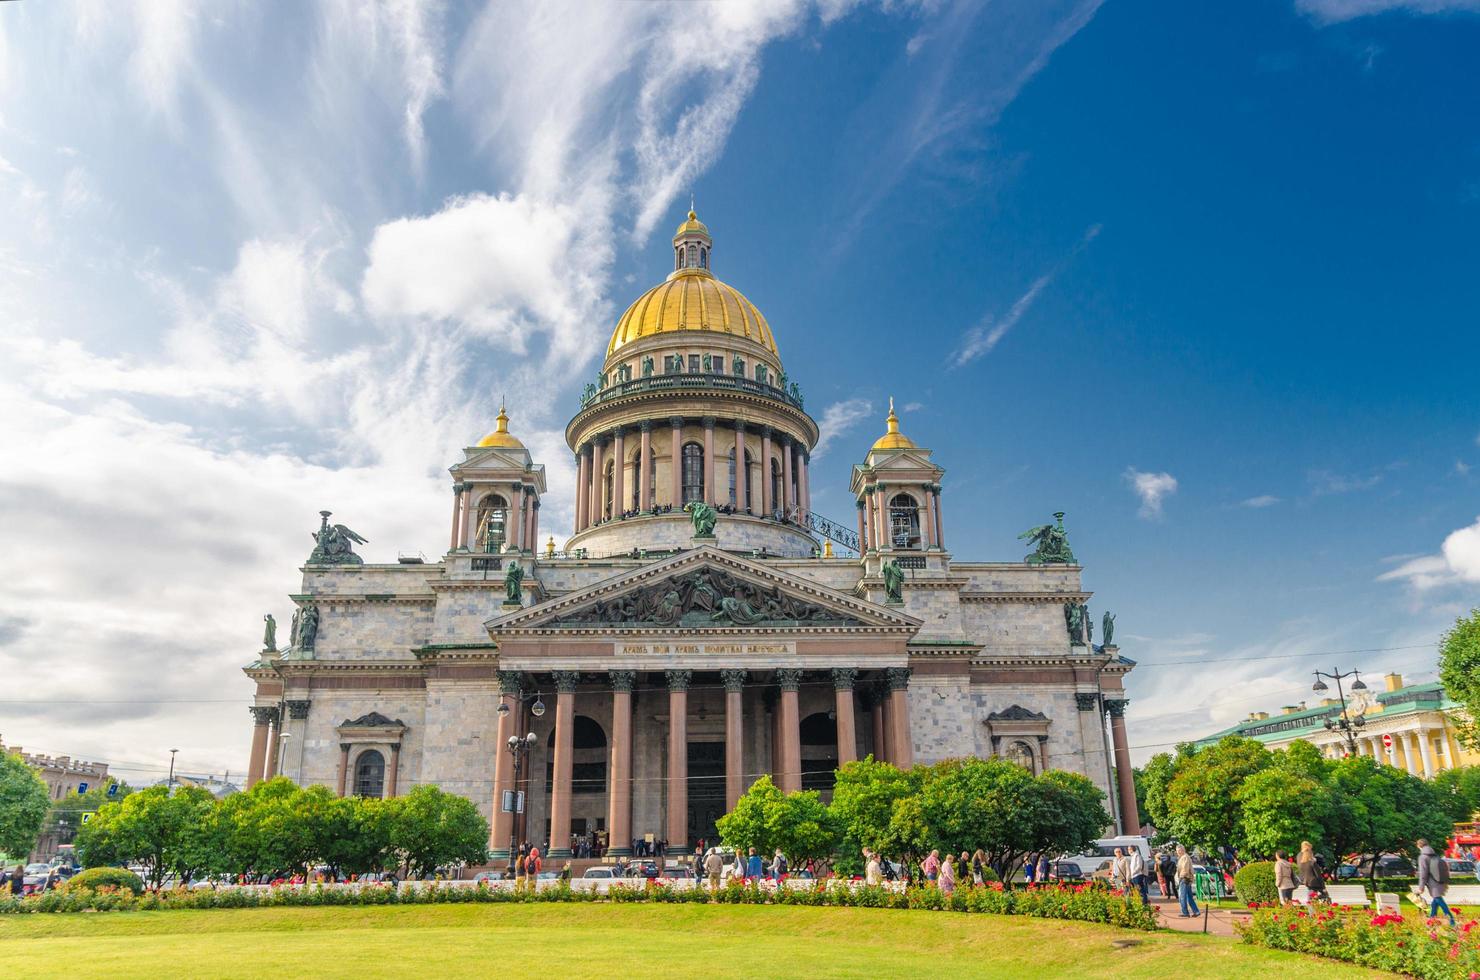 Saint Petersburg, Russia, August 4, 2019 Saint Isaac's Cathedral or Isaakievskiy Sobor museum, neoclassical style building with golden dome photo